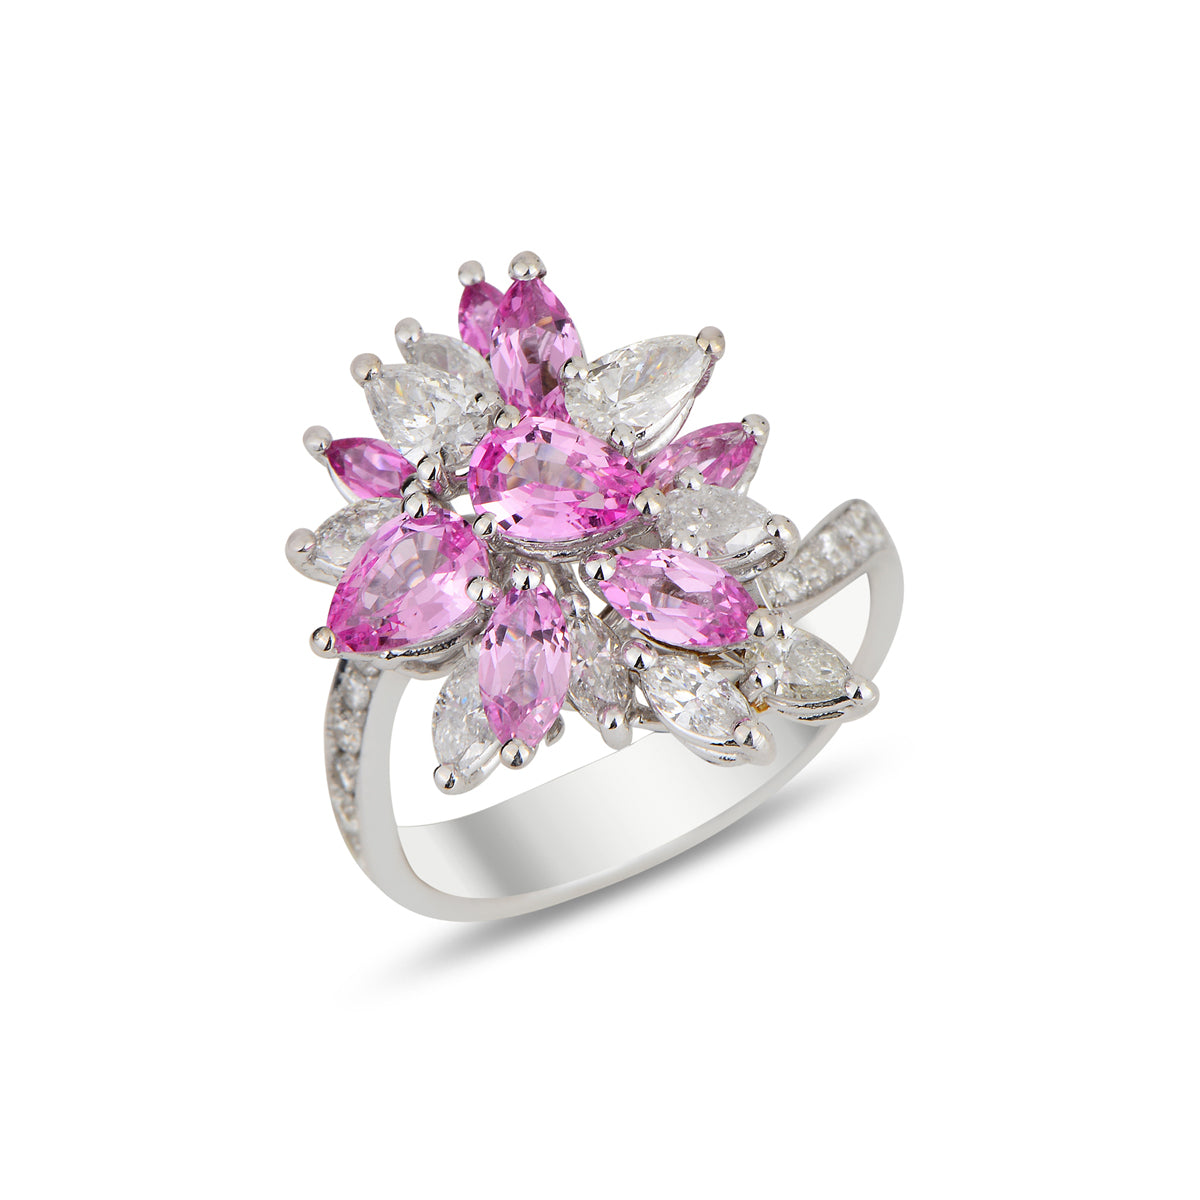 Blossom IV Ring with Pink Sapphire